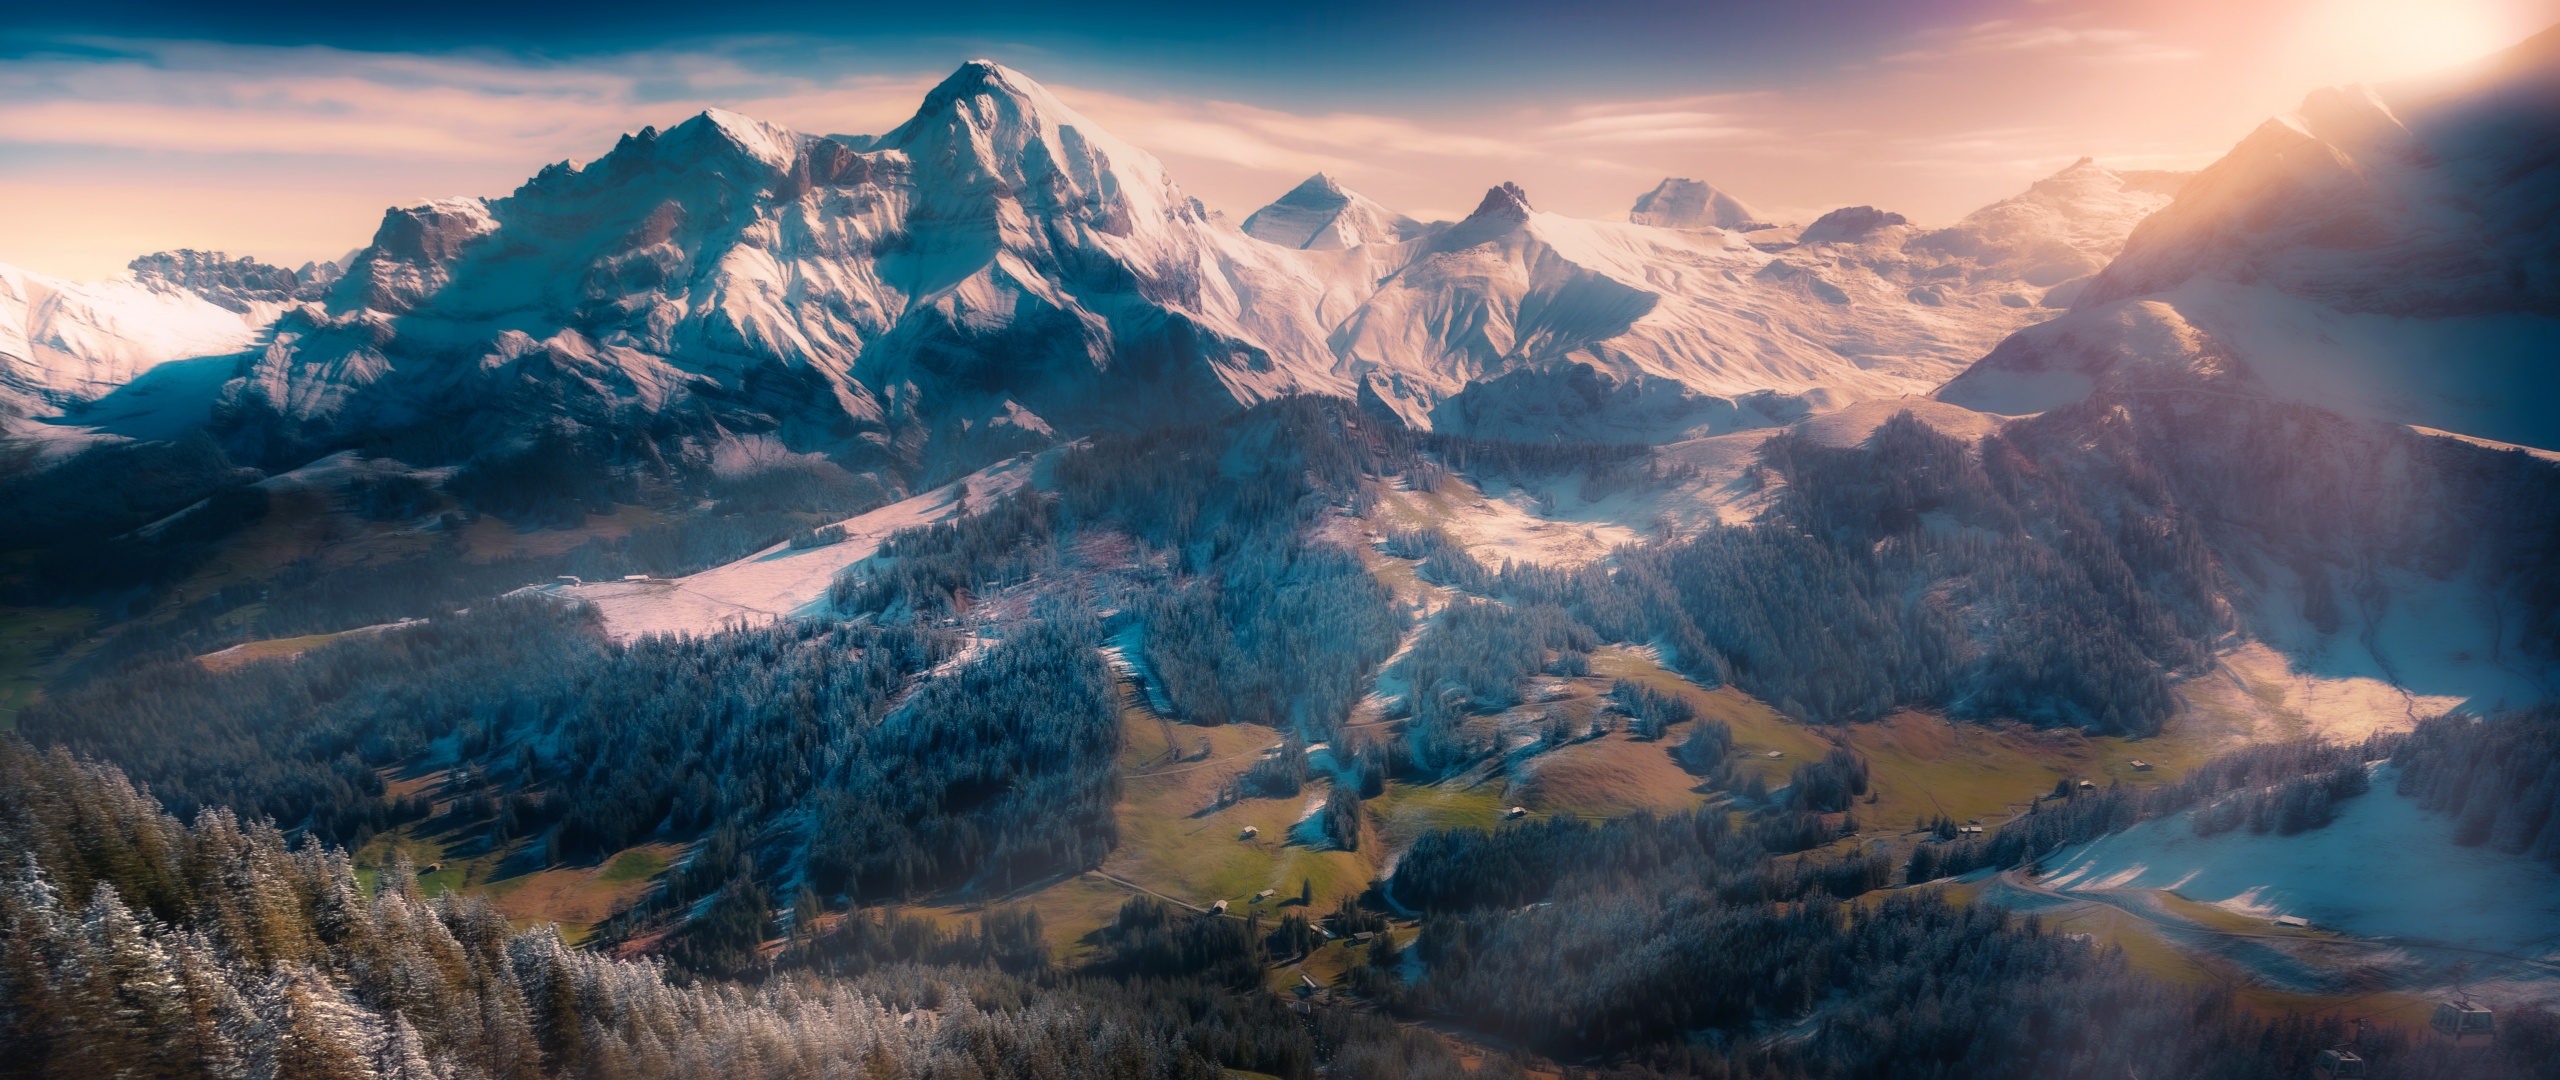 Swiss Alps 4k Wallpaper 3840x2160 Gaming Background Imagesee